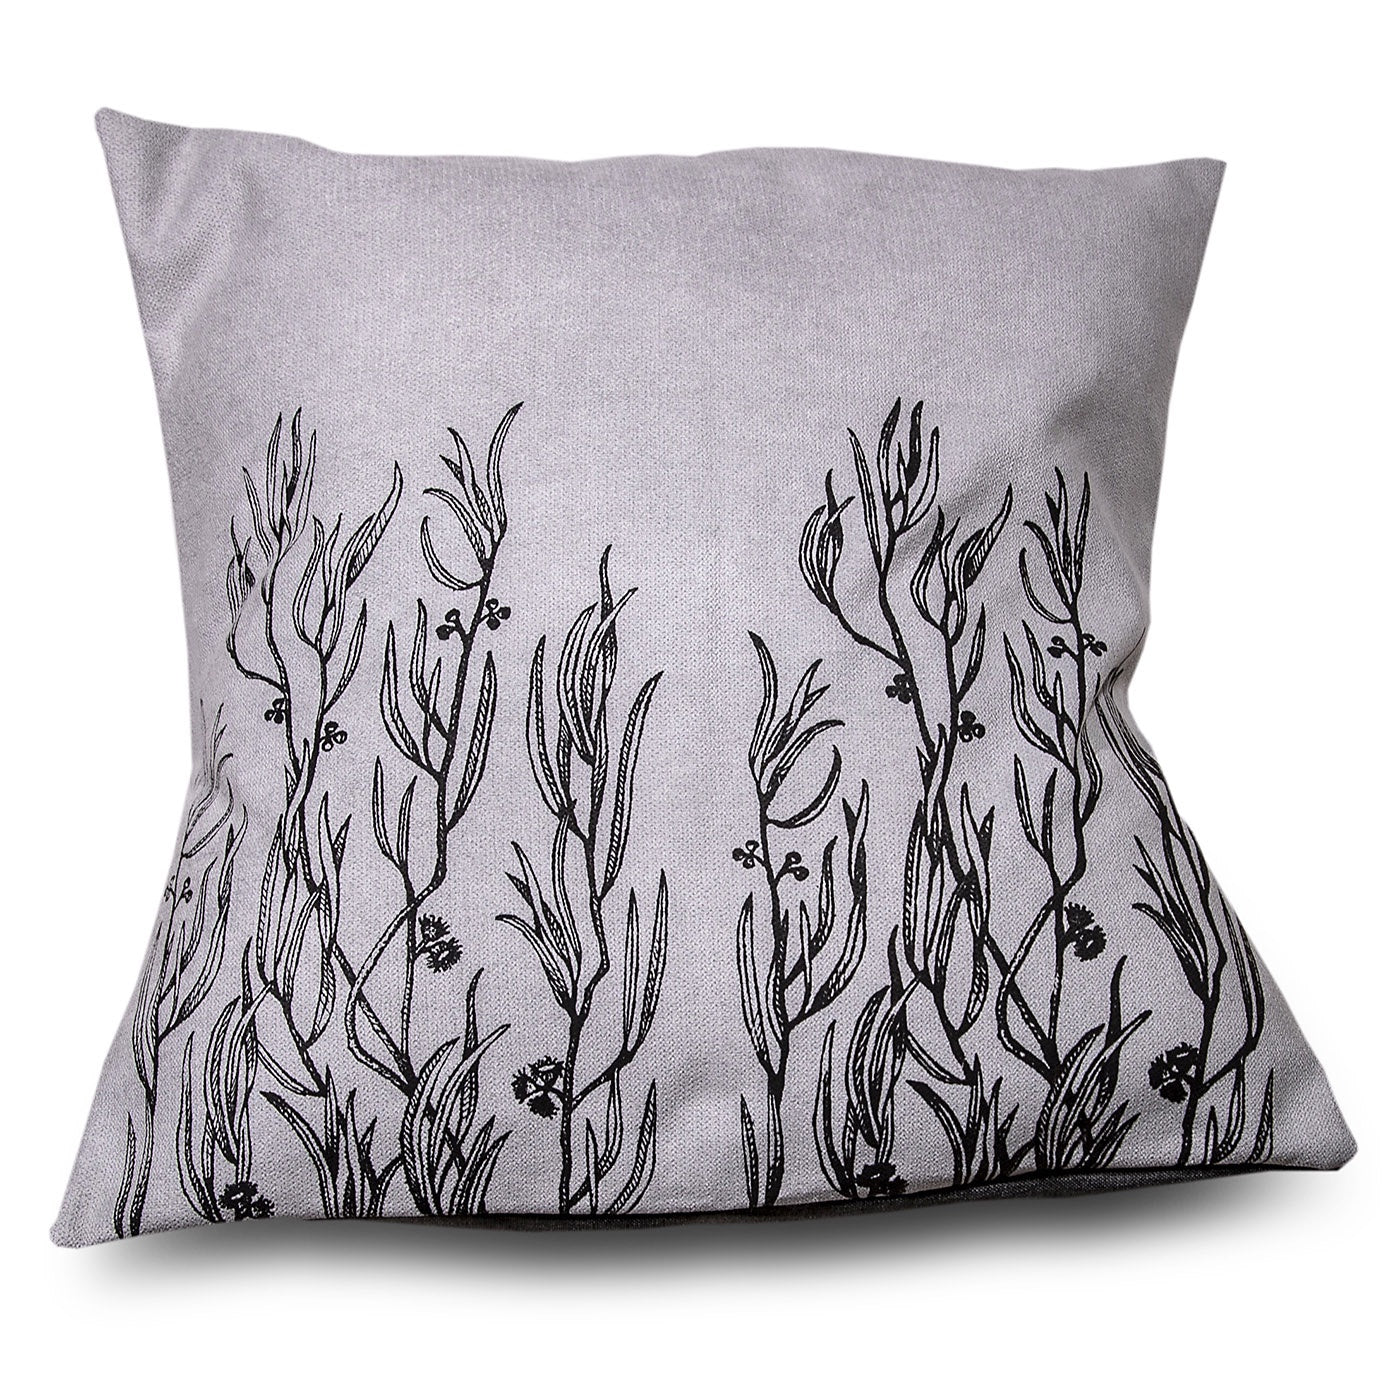 Stalley Textile Co. - Cushion Cover - Peppermint - Black on Light Grey